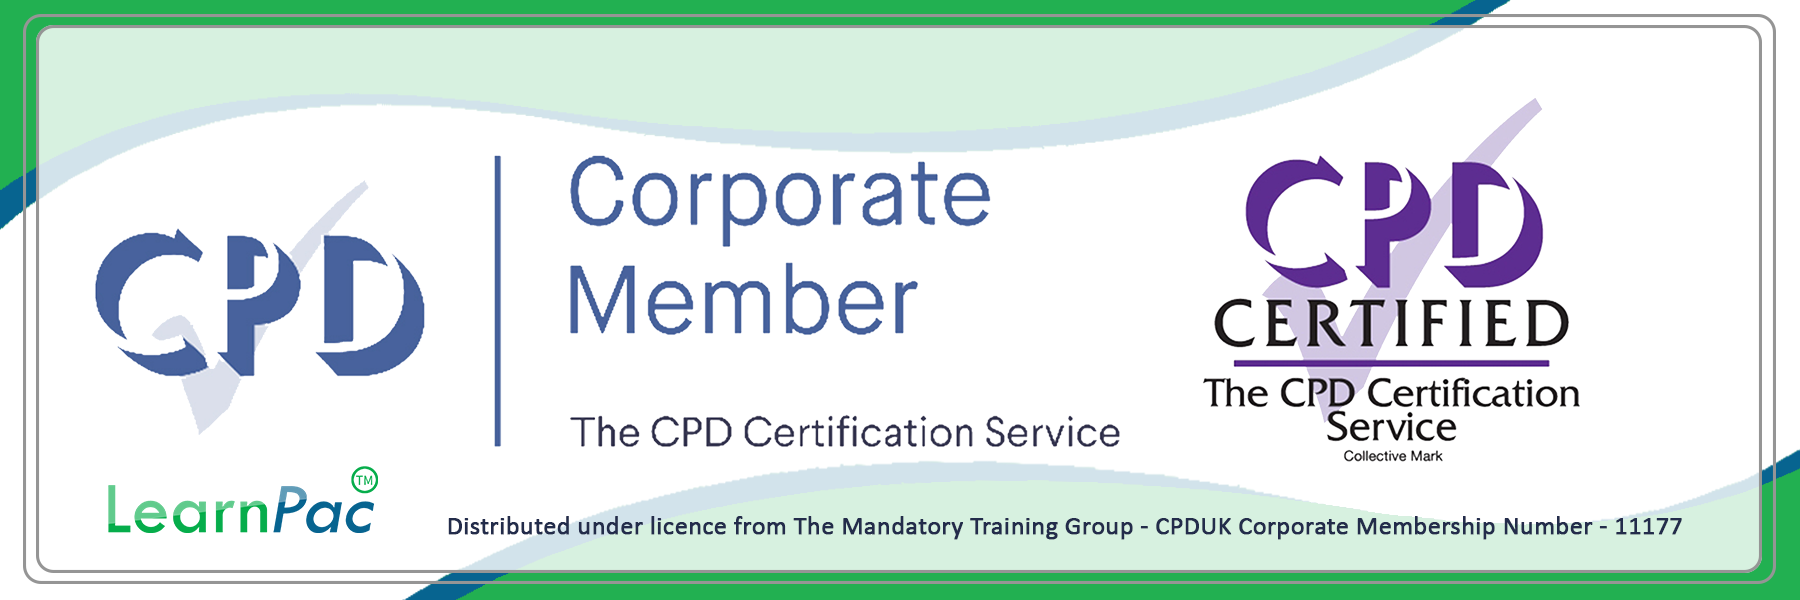 Health and Safety at Work - Online Training Course - CPDUK Certified - Learnpac System UK - 